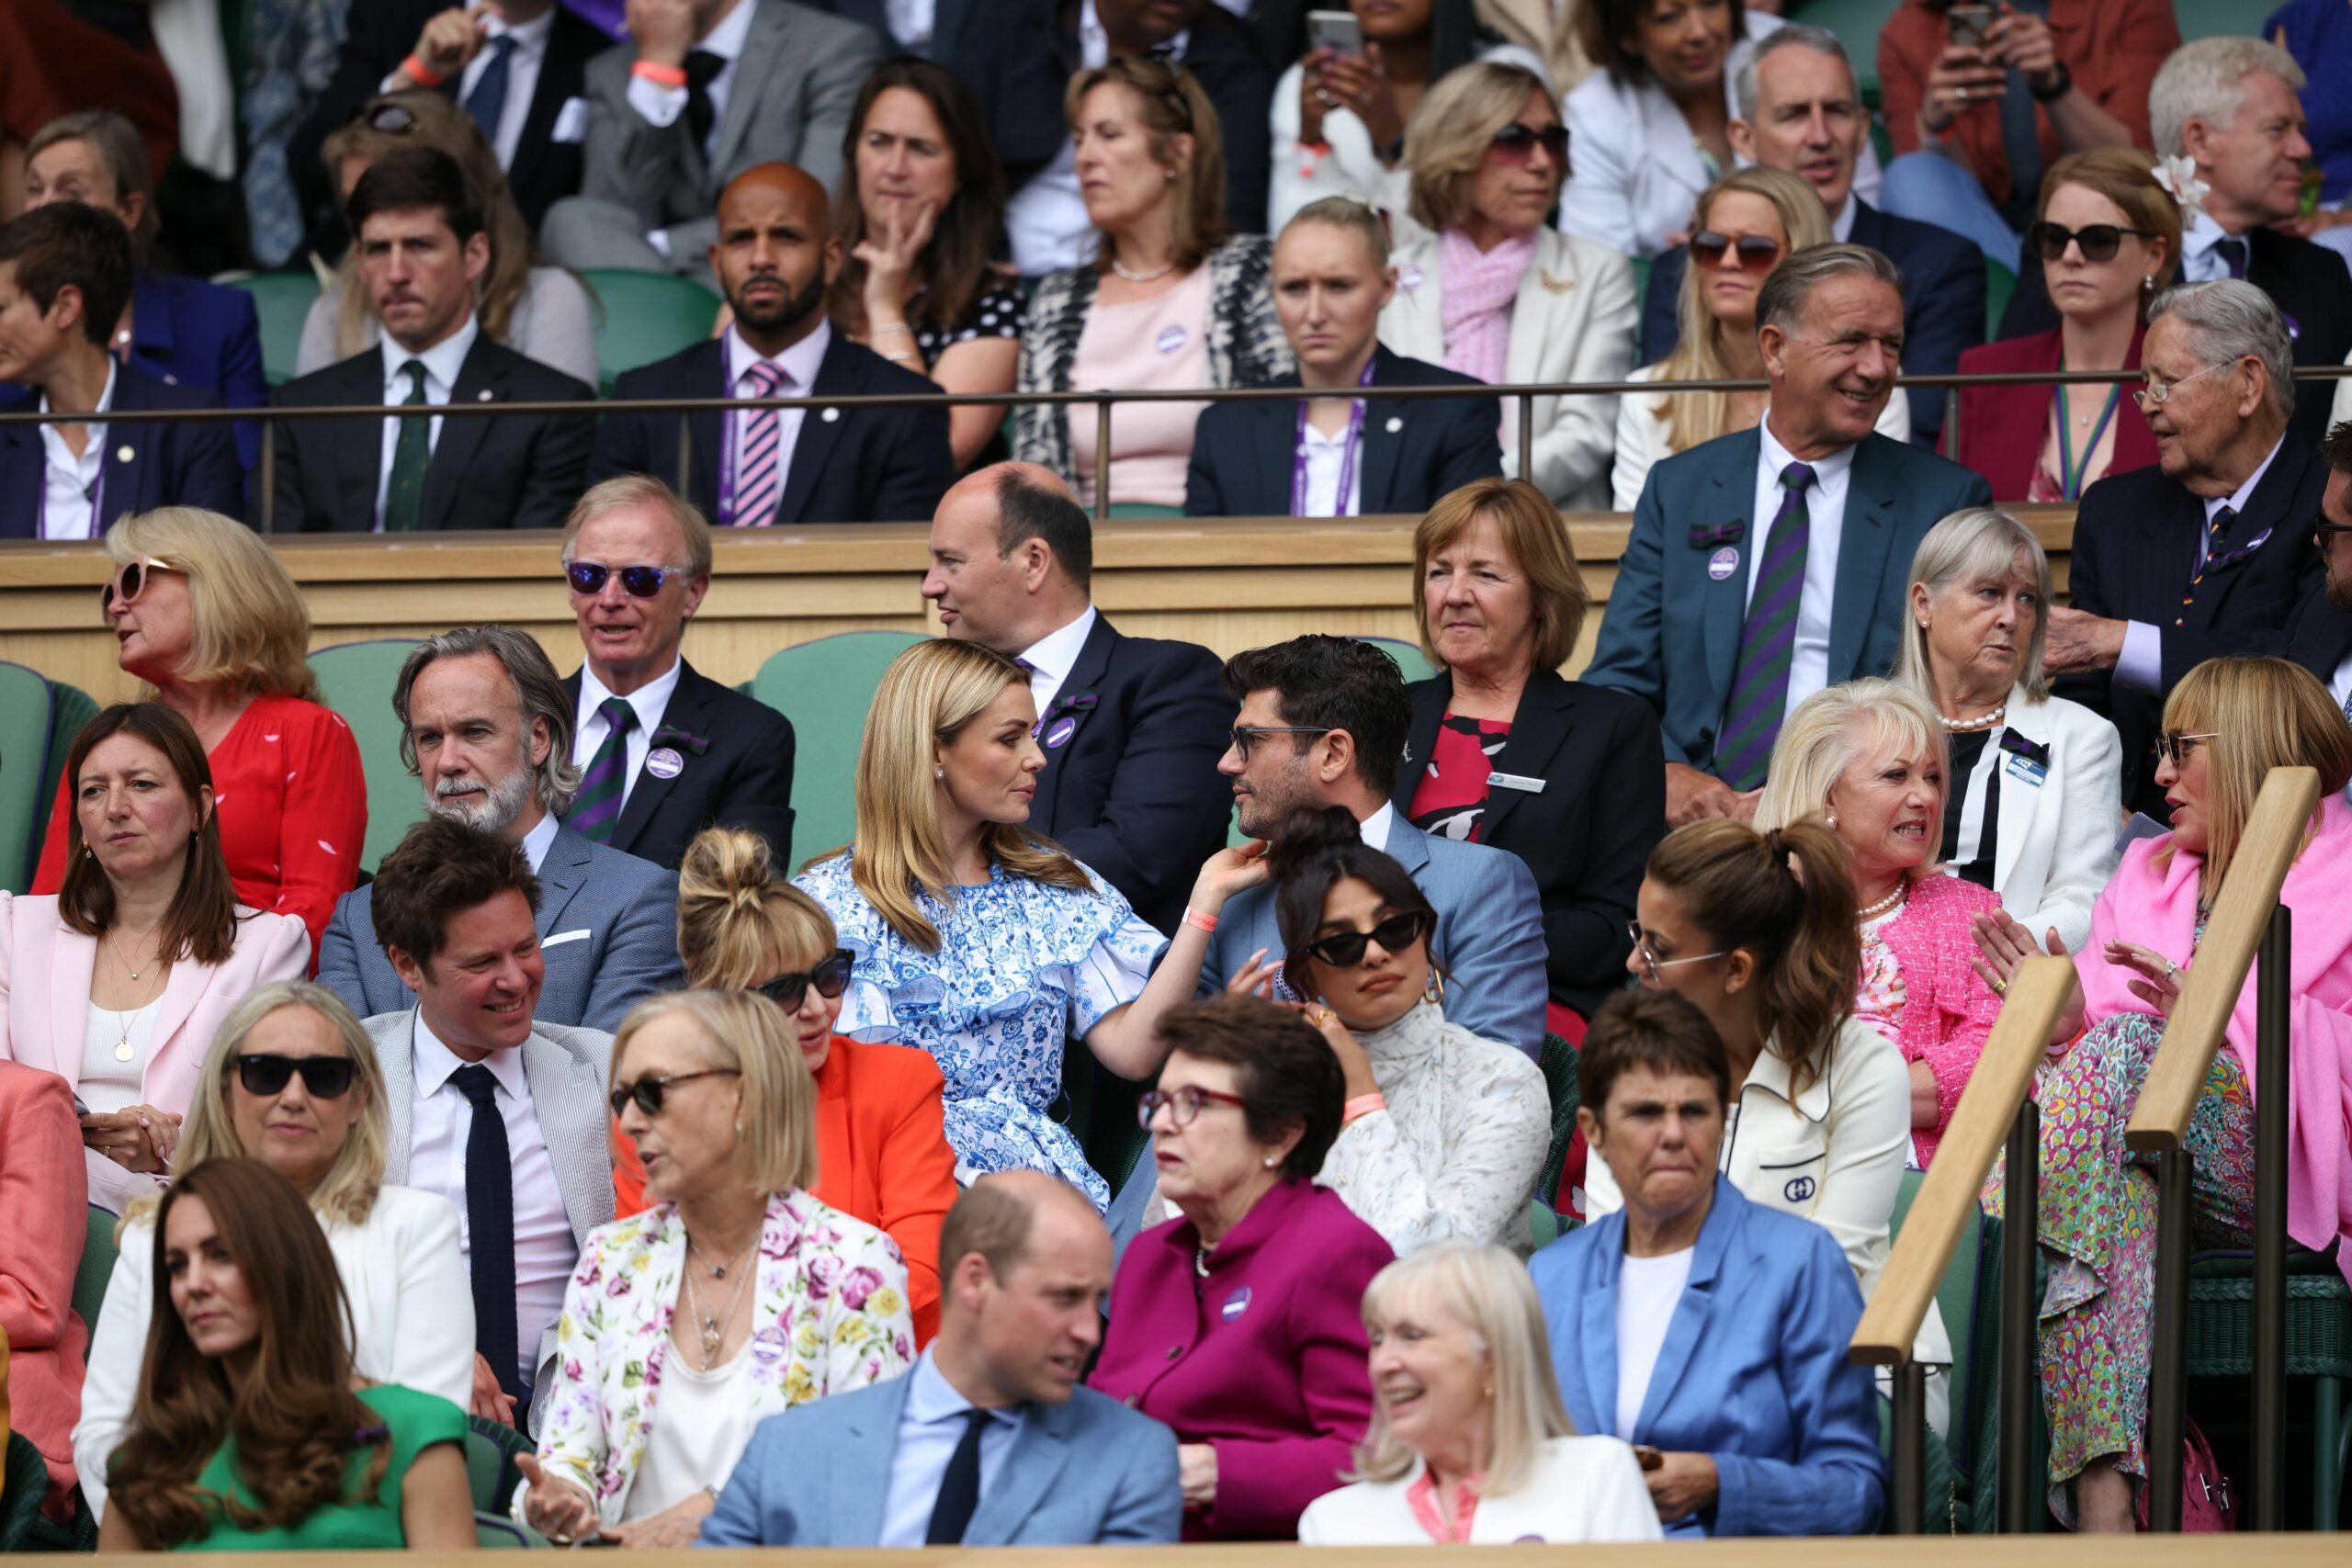 Tom Cruise and Hayley Atwell in the Royal Box on Centre Court at the Wimbledon Tennis Championships Day 12 The All England Lawn Tennis and Croquet Club London England on July 10th 2021